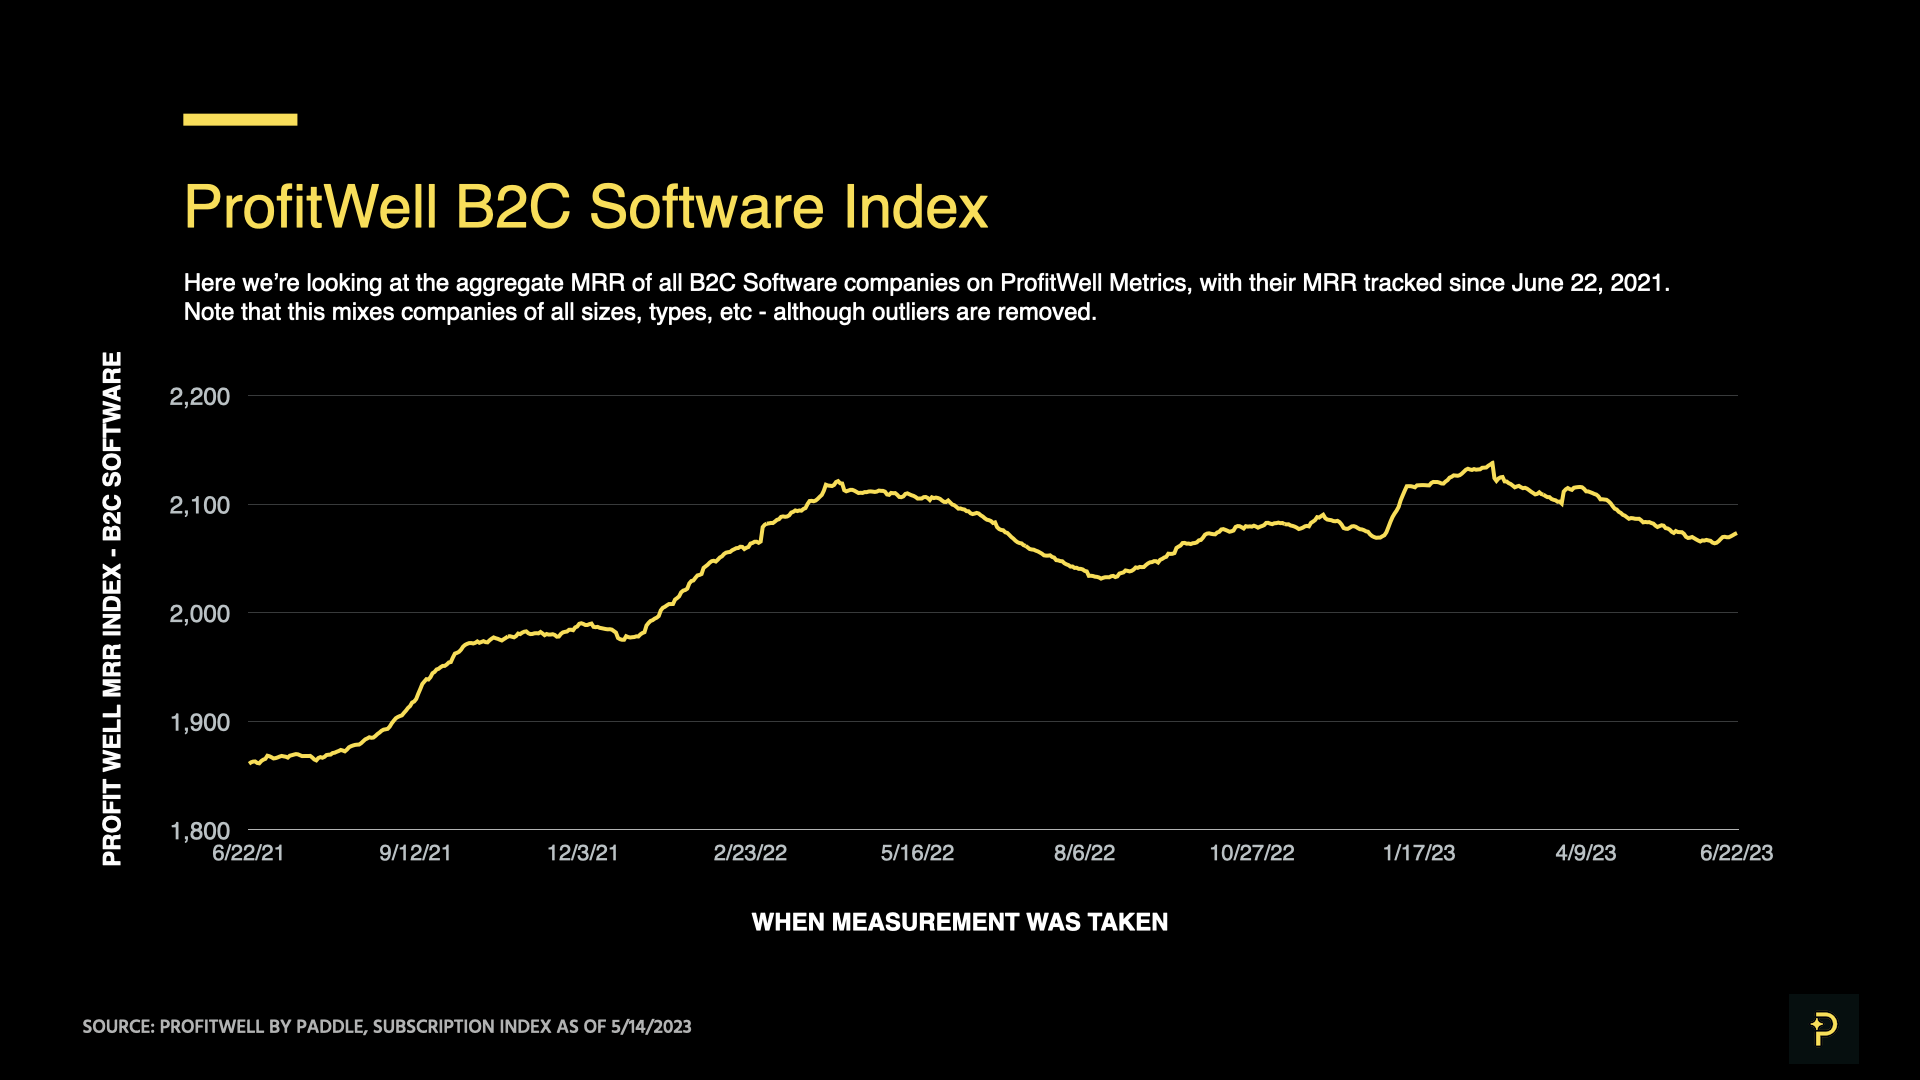 ProfitWell B2C Software Index - MRR over time